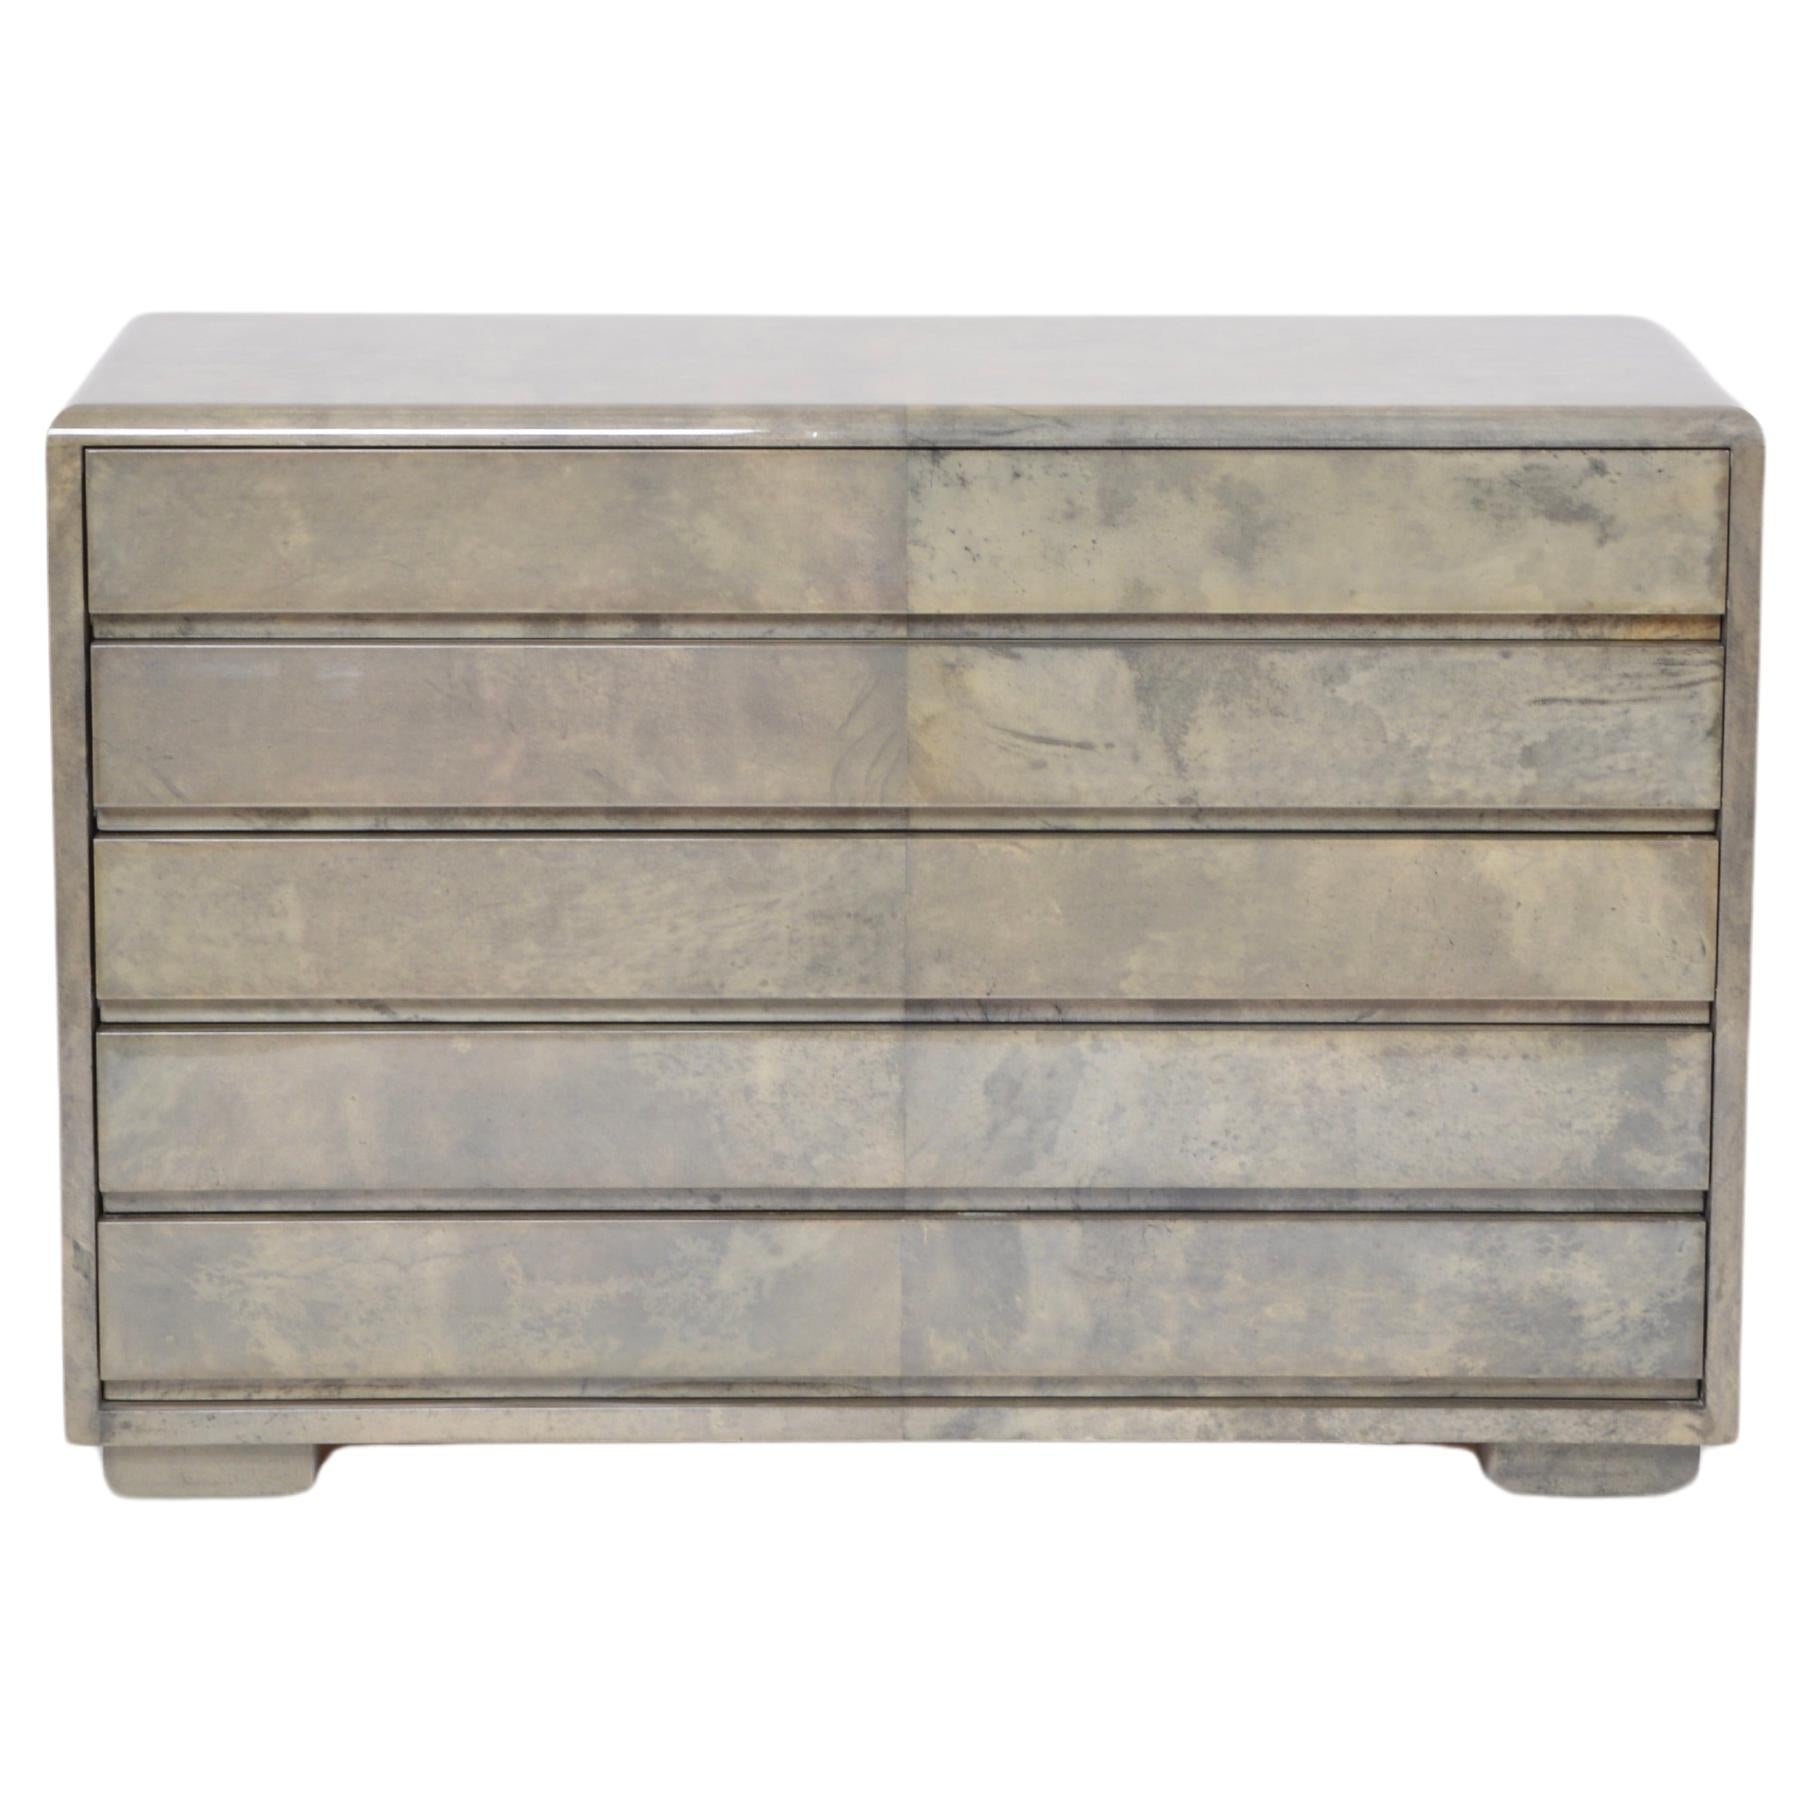 Mid-Century Modern Chest of drawers made of laquered Goat Skin by Aldo Tura